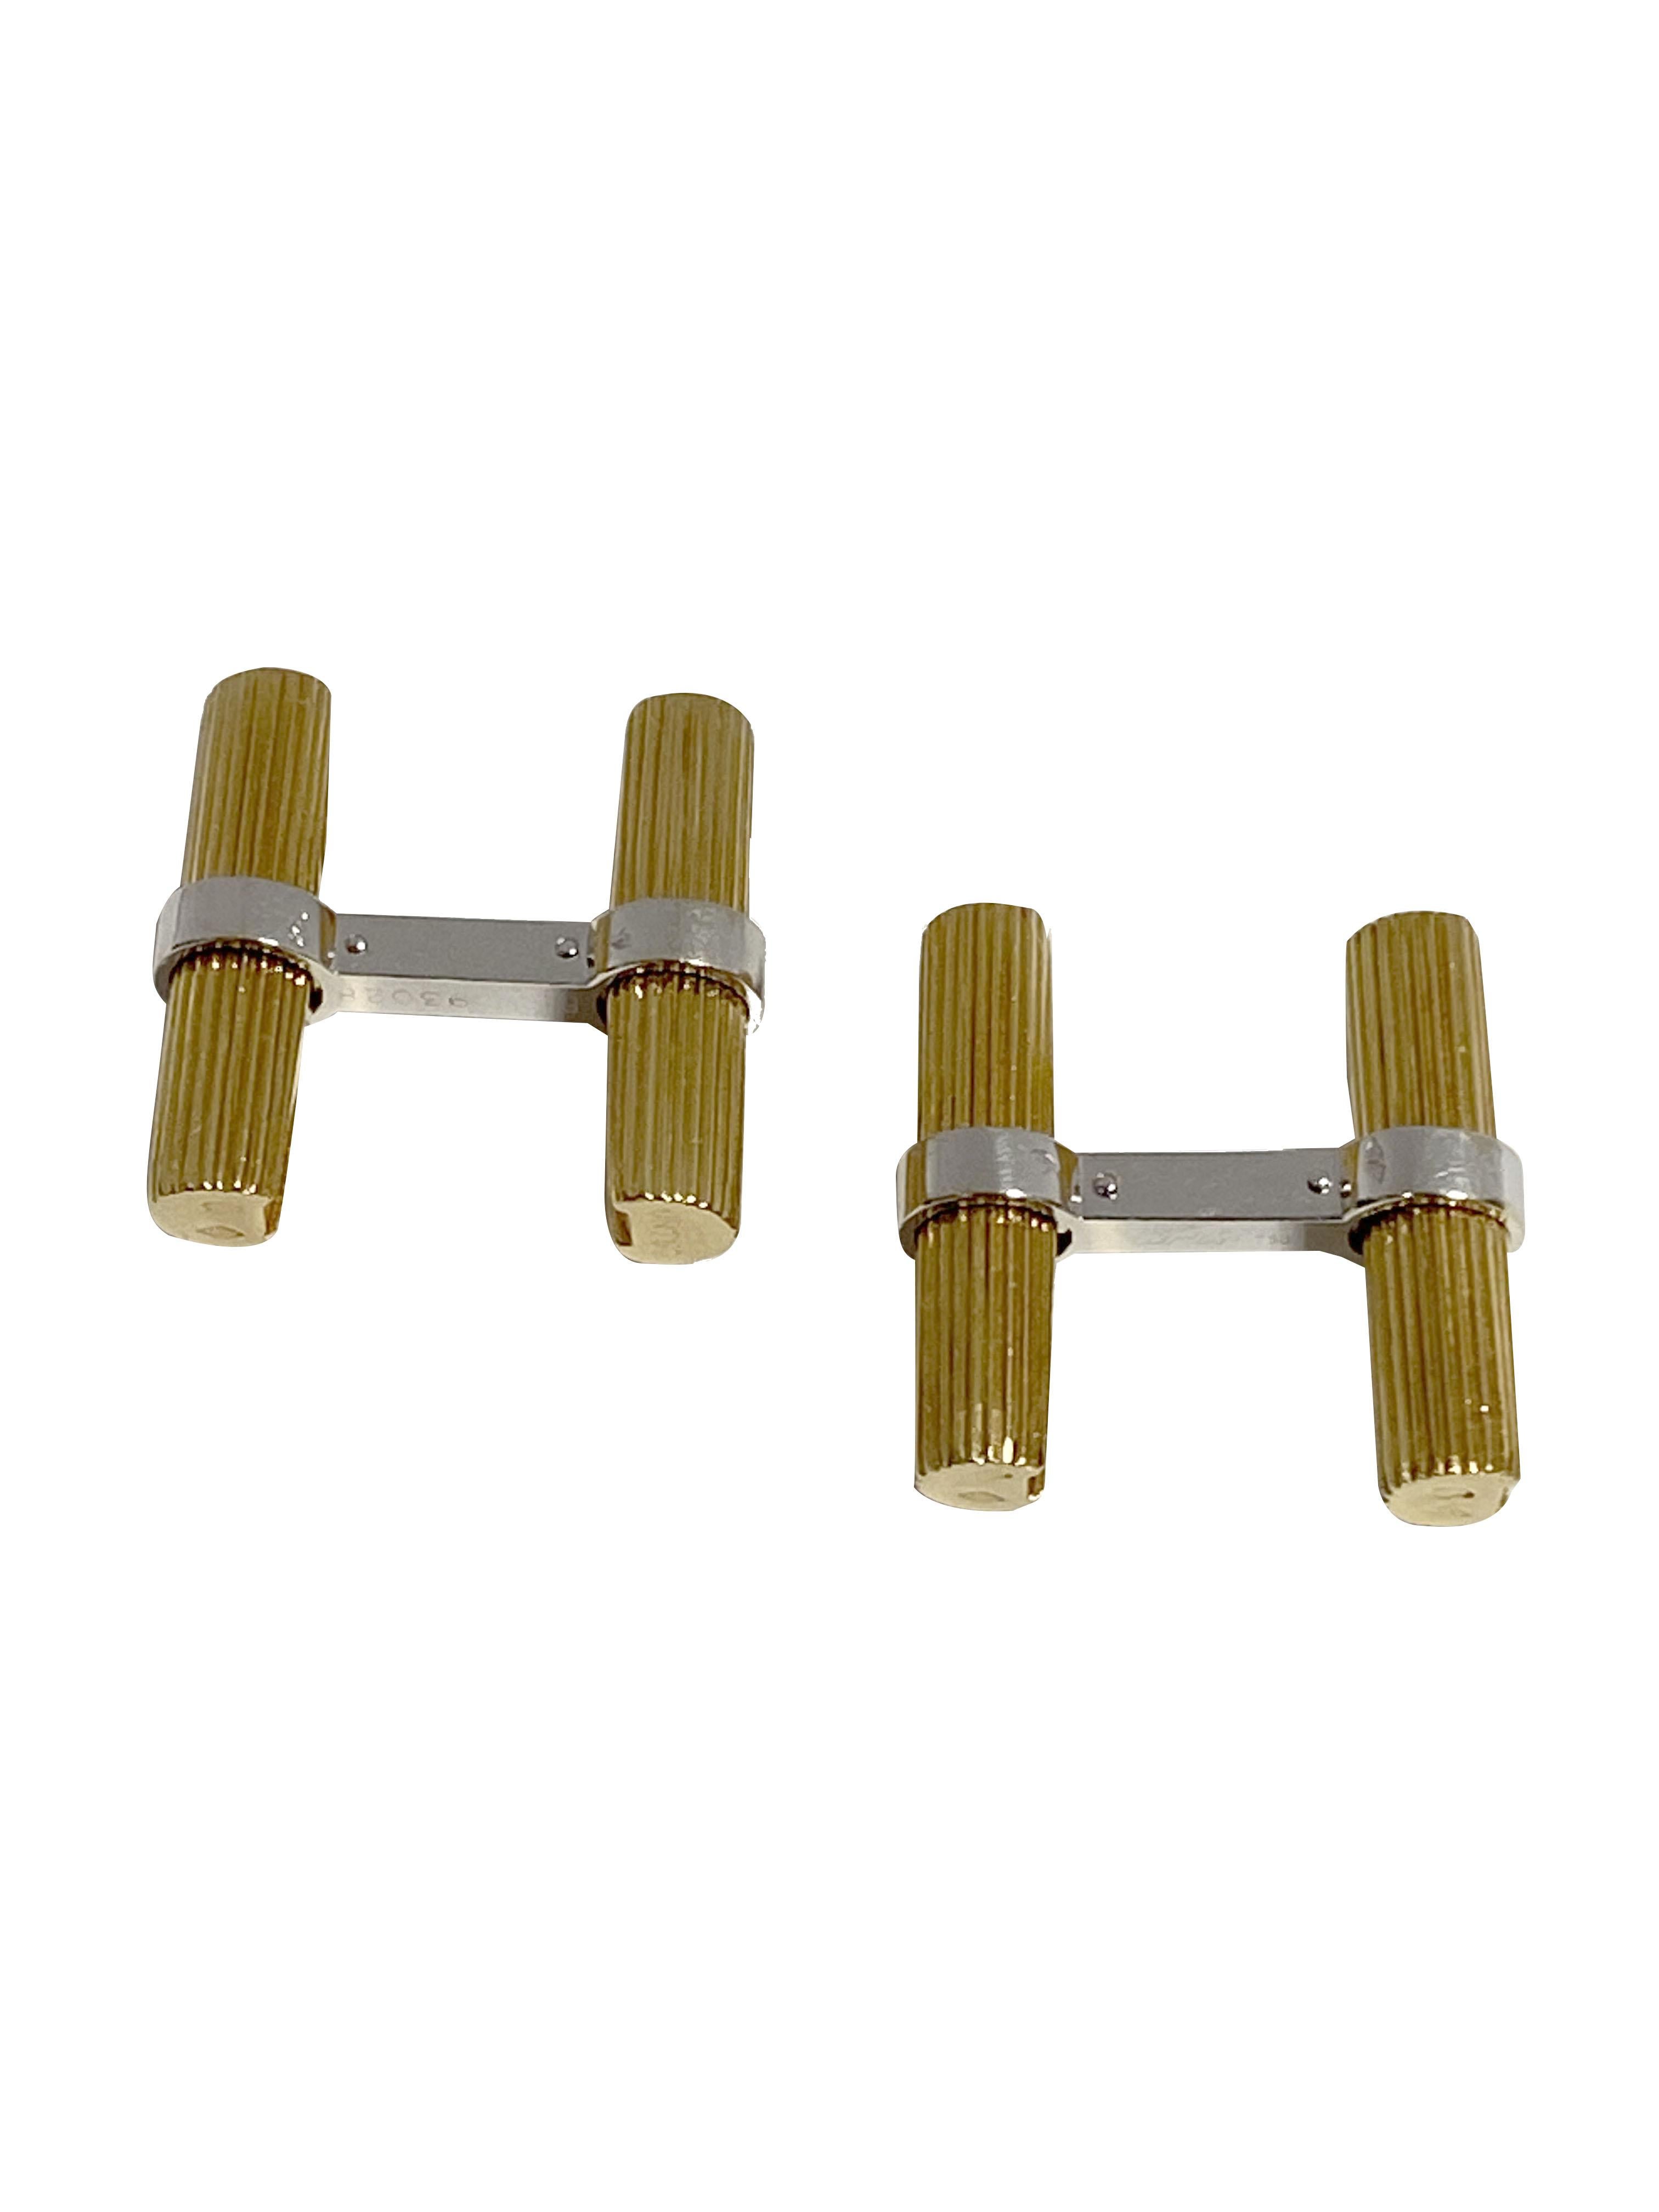 Circa 1970s Cartier Paris 18k Yellow and White Gold Bar Cufflinks, Having a Ribbed Grooved Design, the Bar sections measure 7/8 inch in length. Signed, numbered with French stamps and come in the original Presentation box.